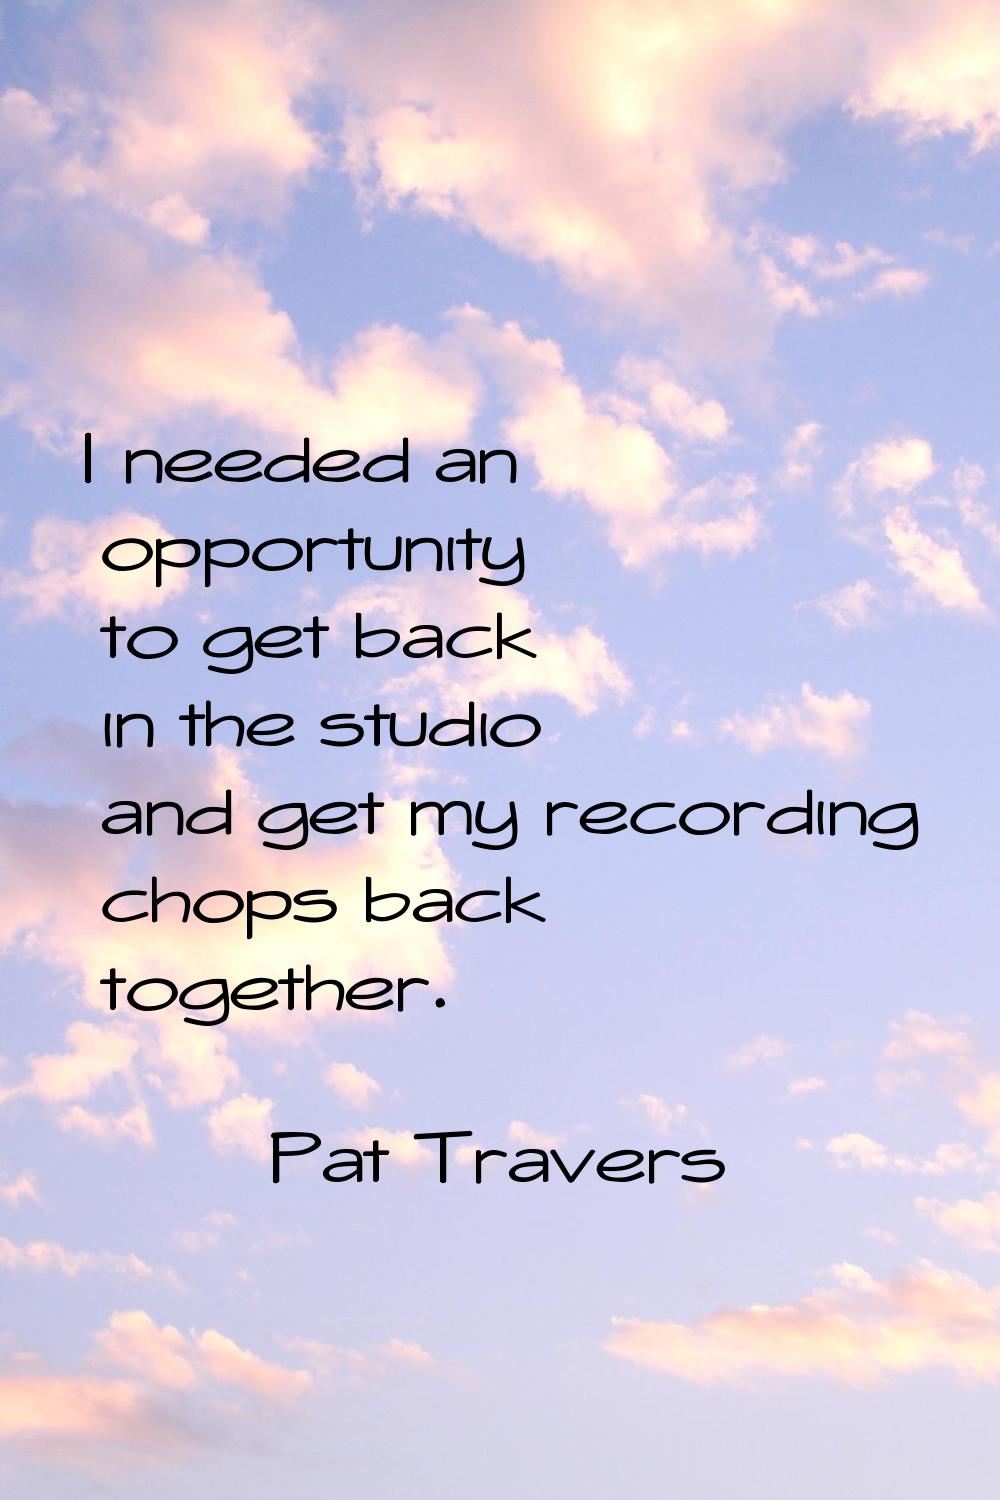 I needed an opportunity to get back in the studio and get my recording chops back together.